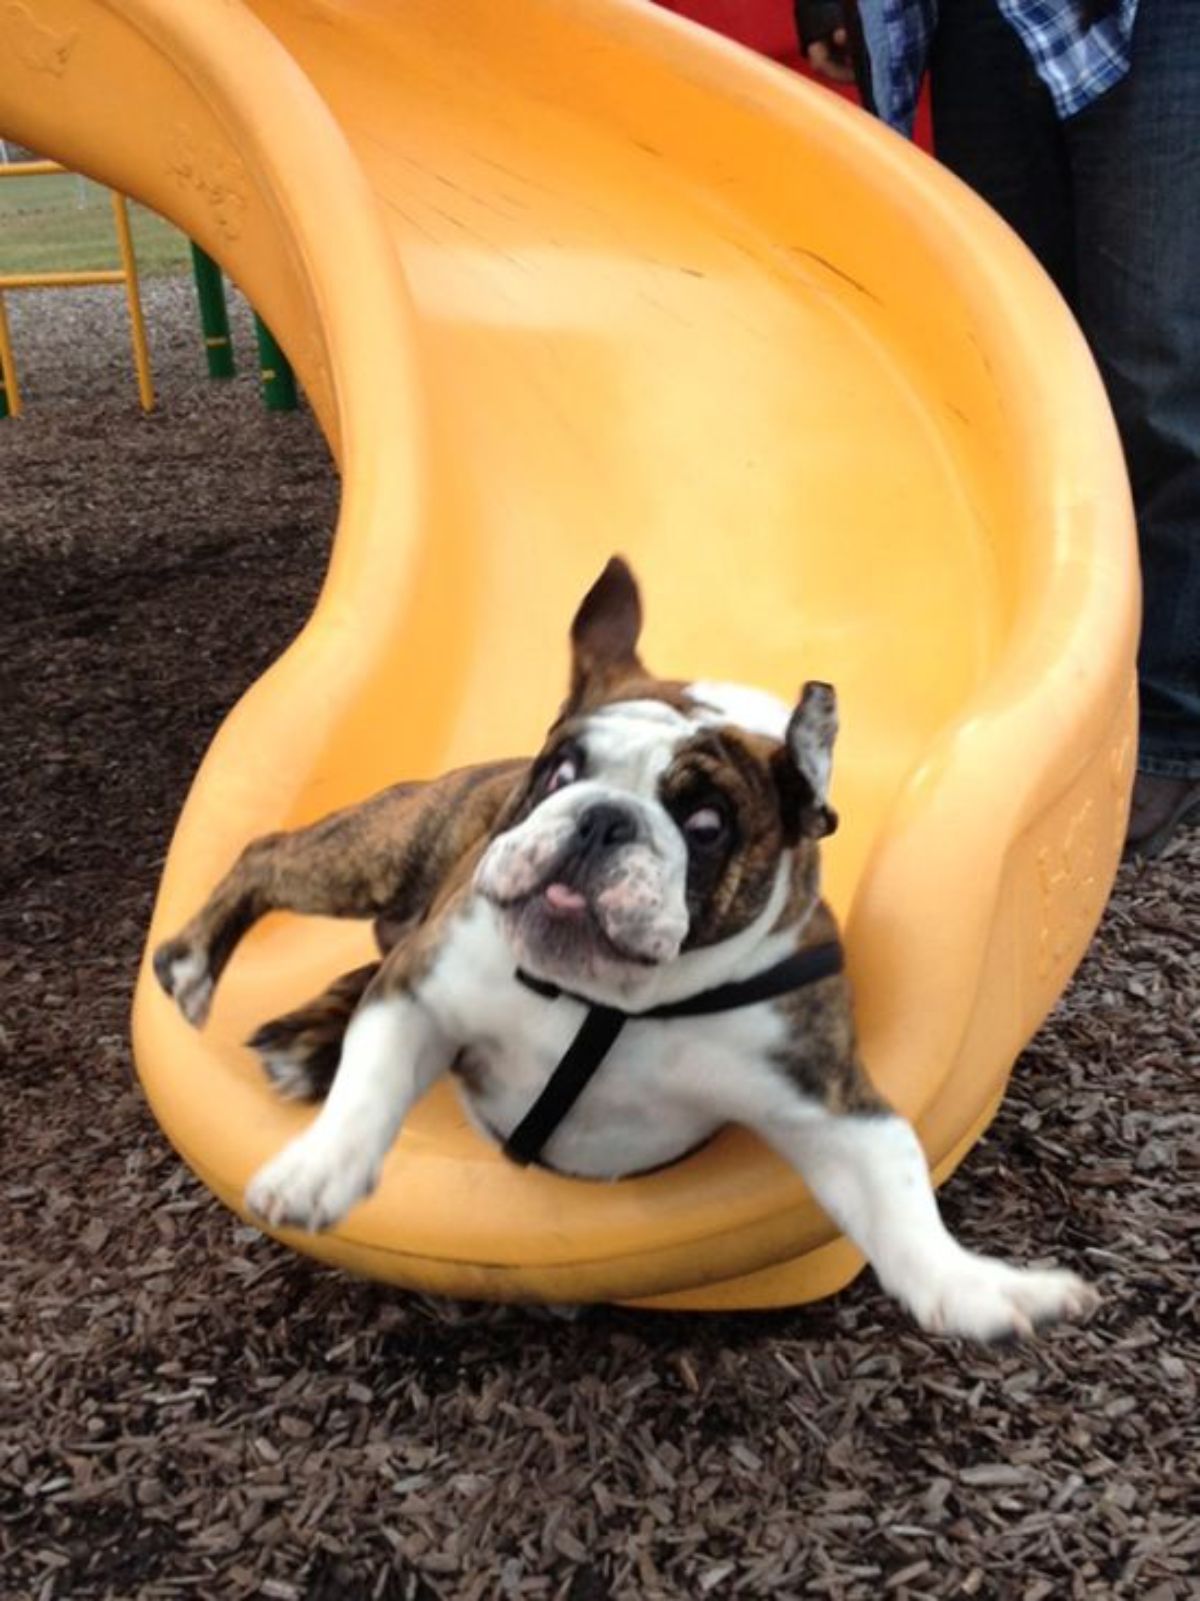 brown and white bulldog falling down a yellow slide looking alarmed